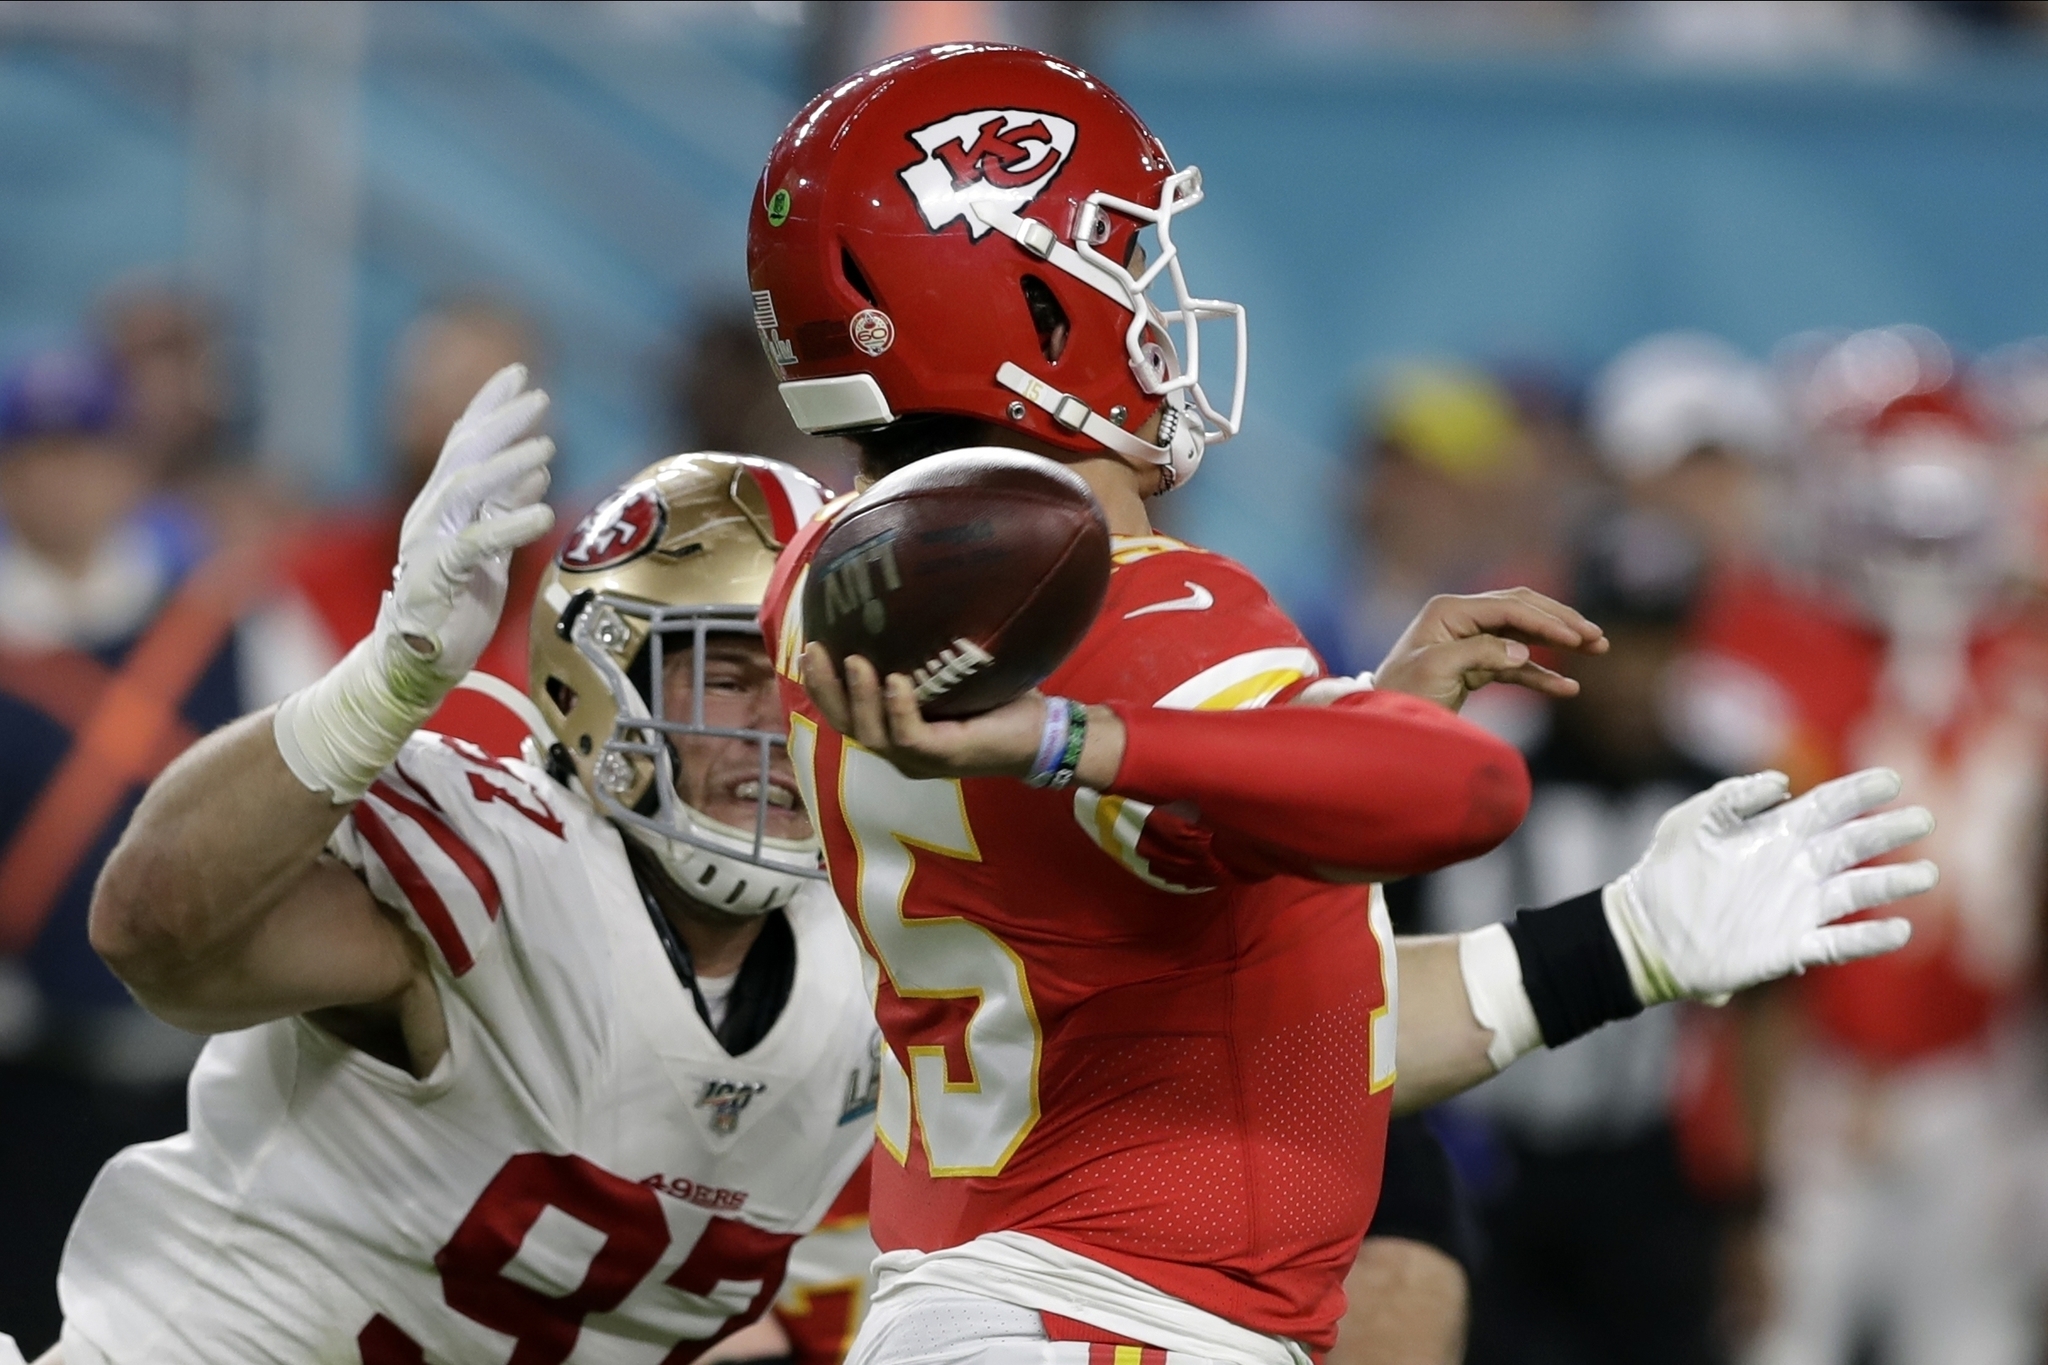 Nick Bosa challenges Mahomes back in 2020